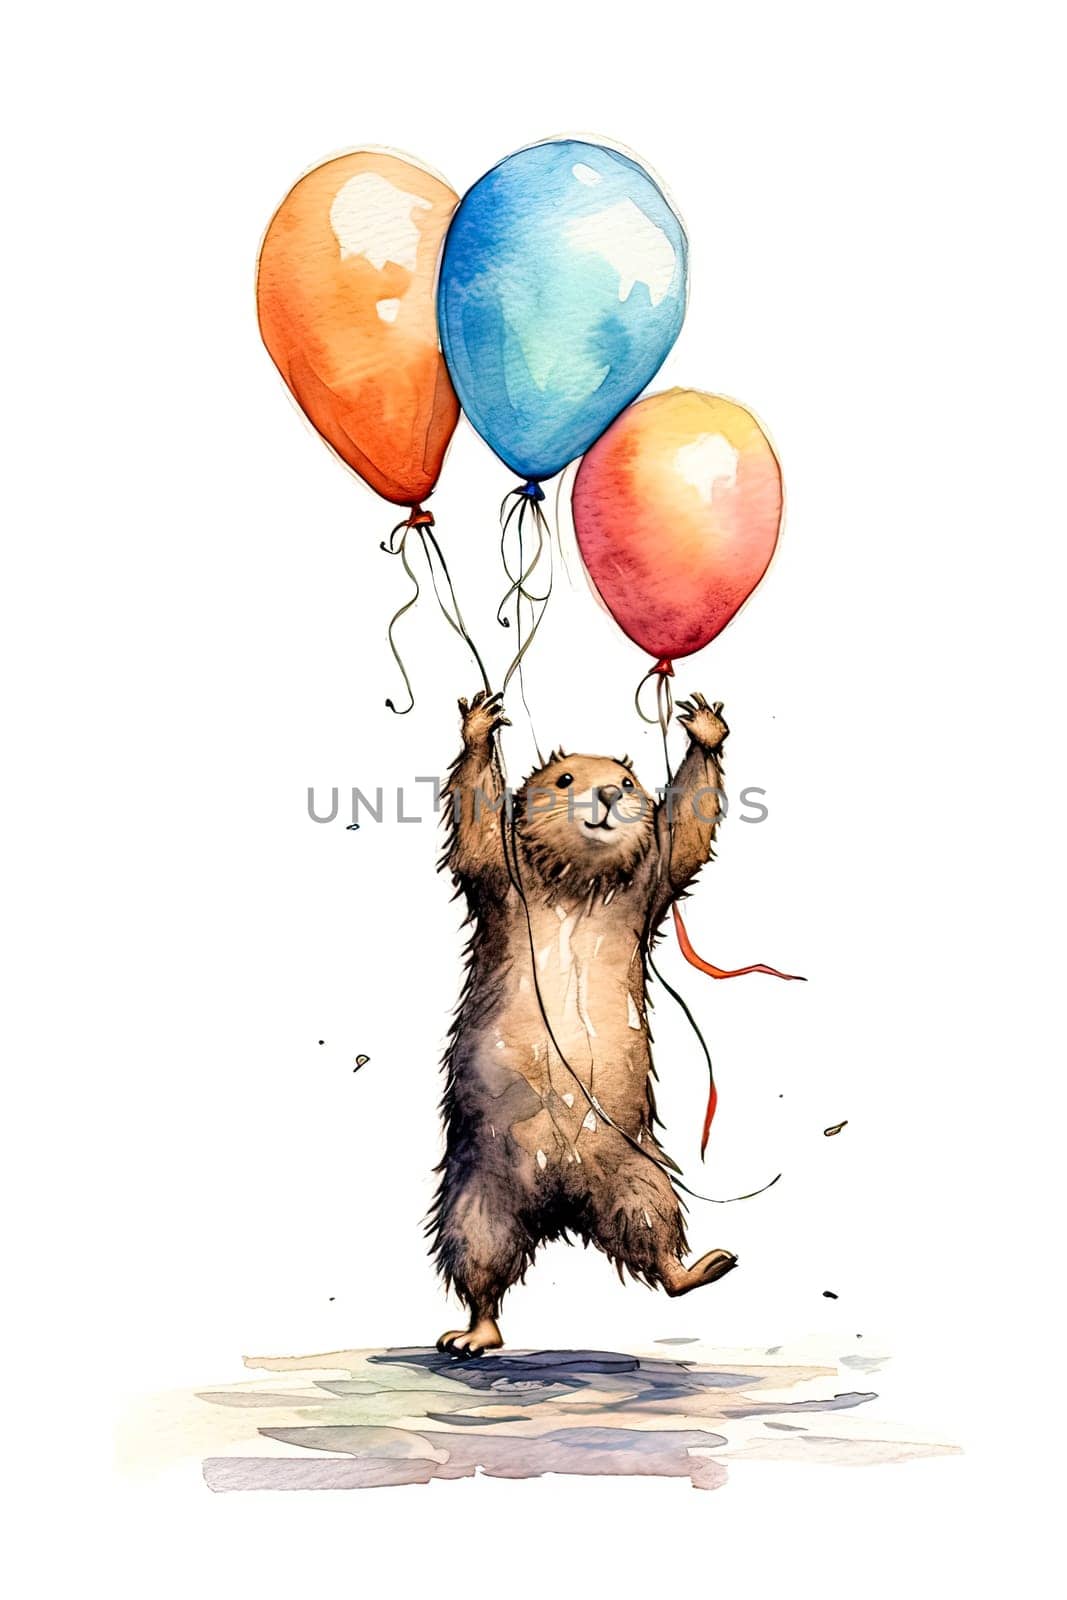 Brighten someones day with this charming watercolor illustration of a marmot holding balloons, ideal for sending cheerful greetings and well wishes.